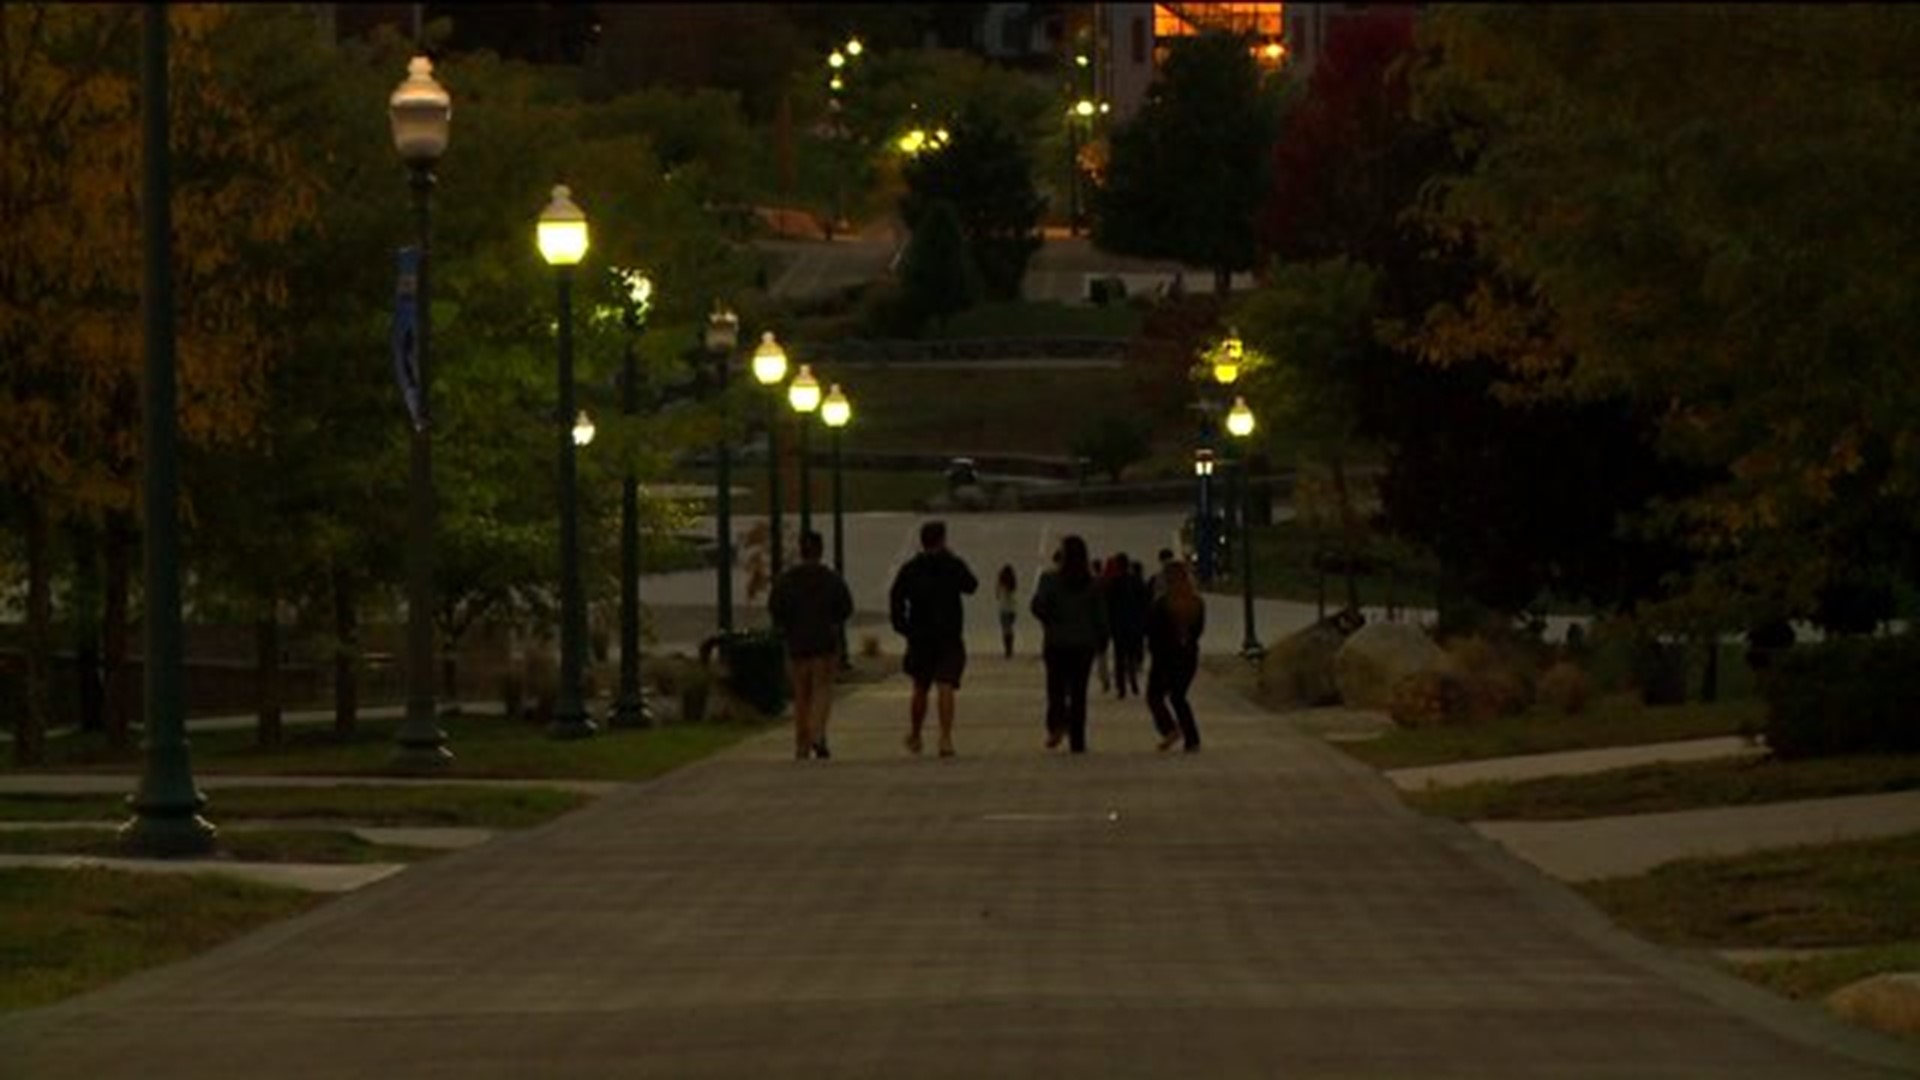 CCSU student expelled for sexual assault